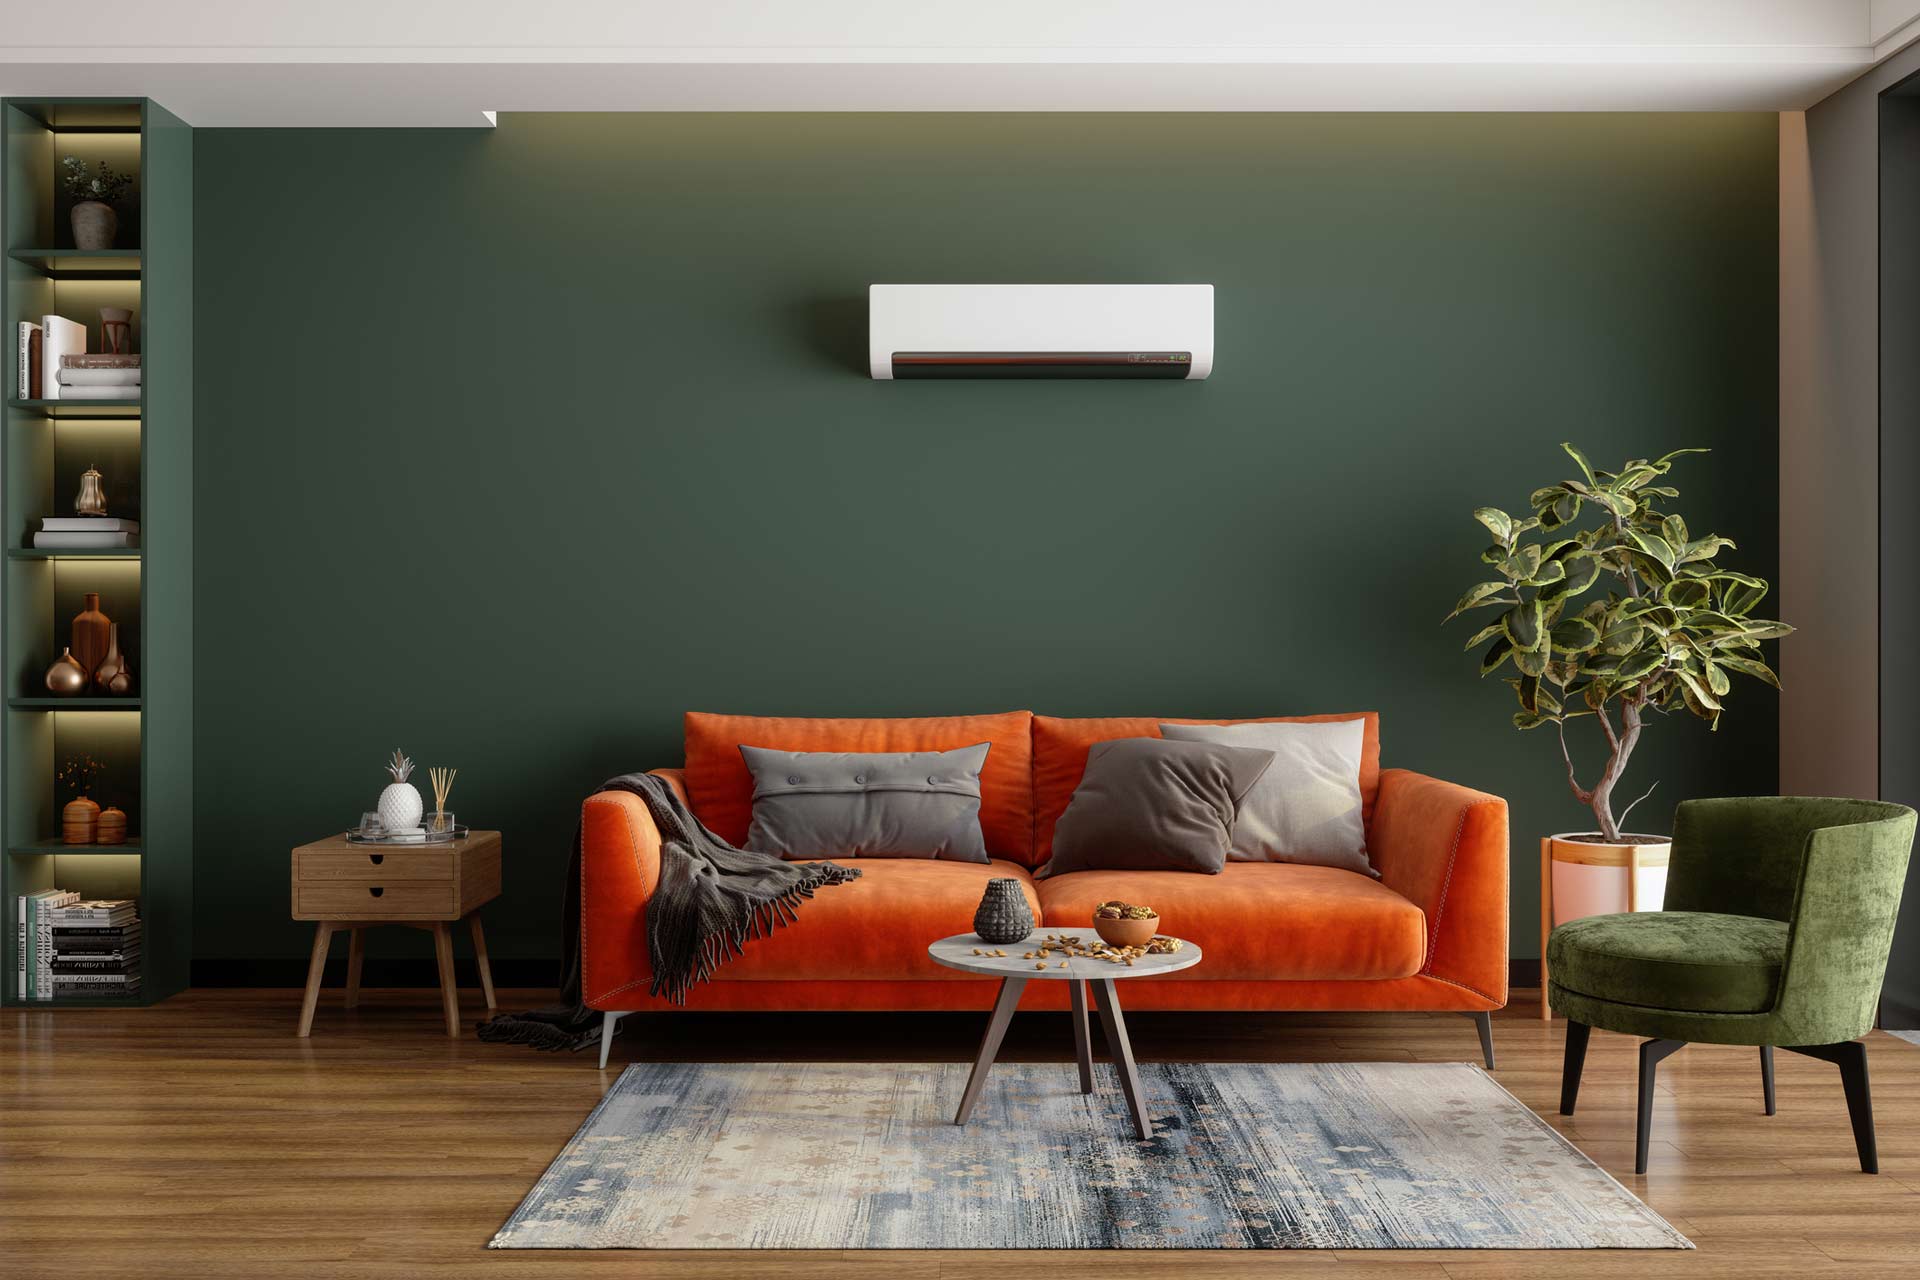 Wellington Heat Pumps and Home Ventilation Systems